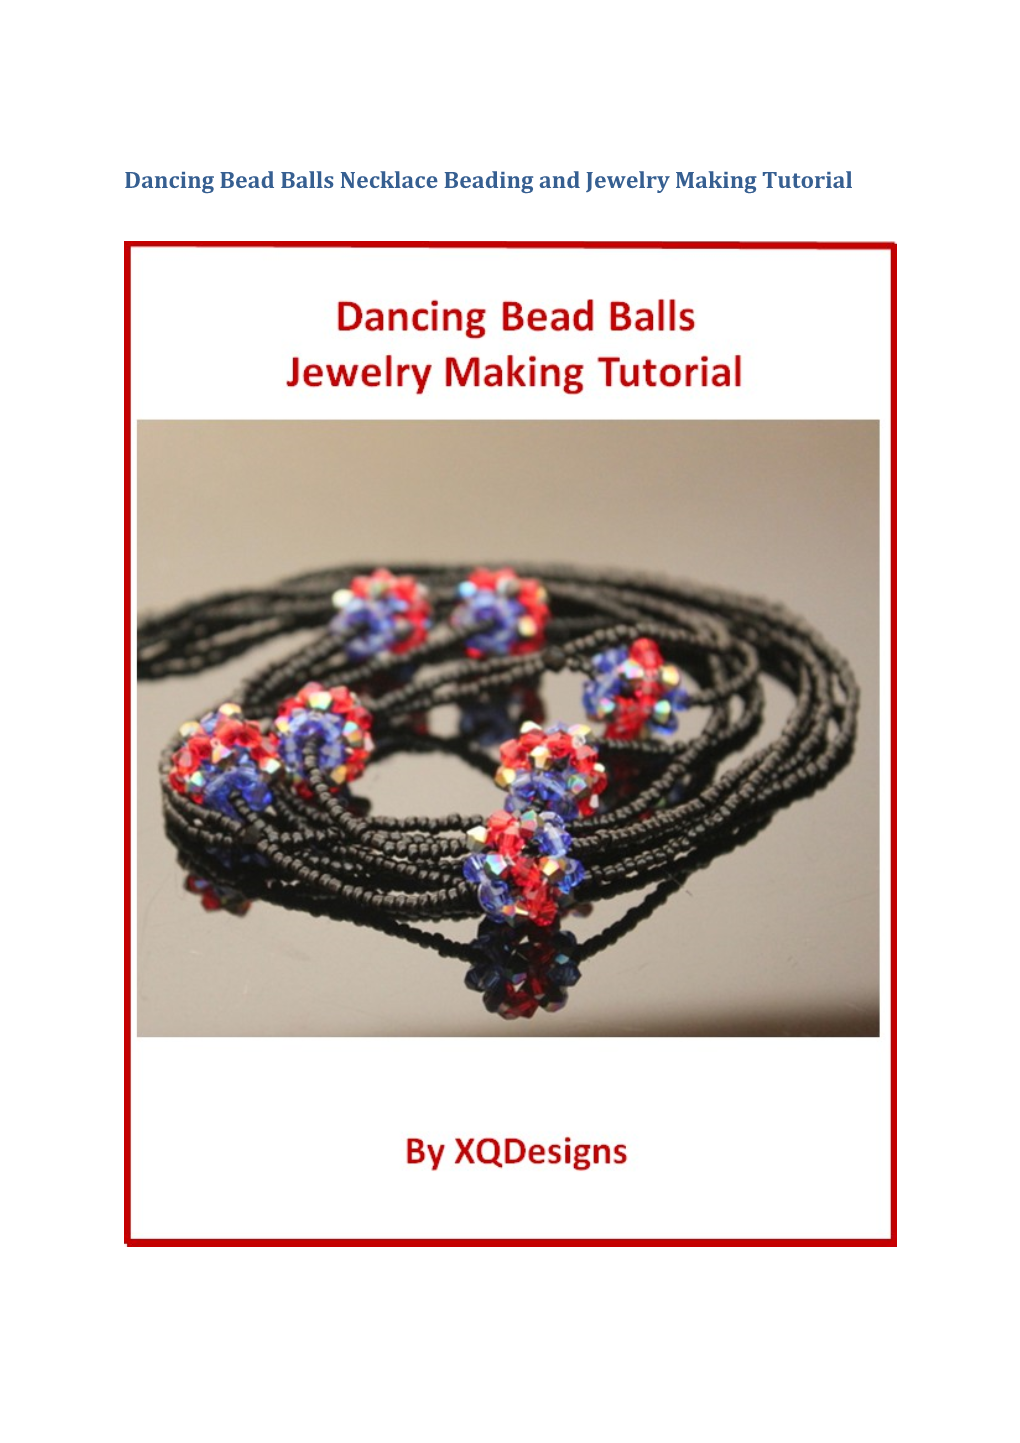 Dancing Bead Balls Necklace Beading and Jewelry Making Tutorial